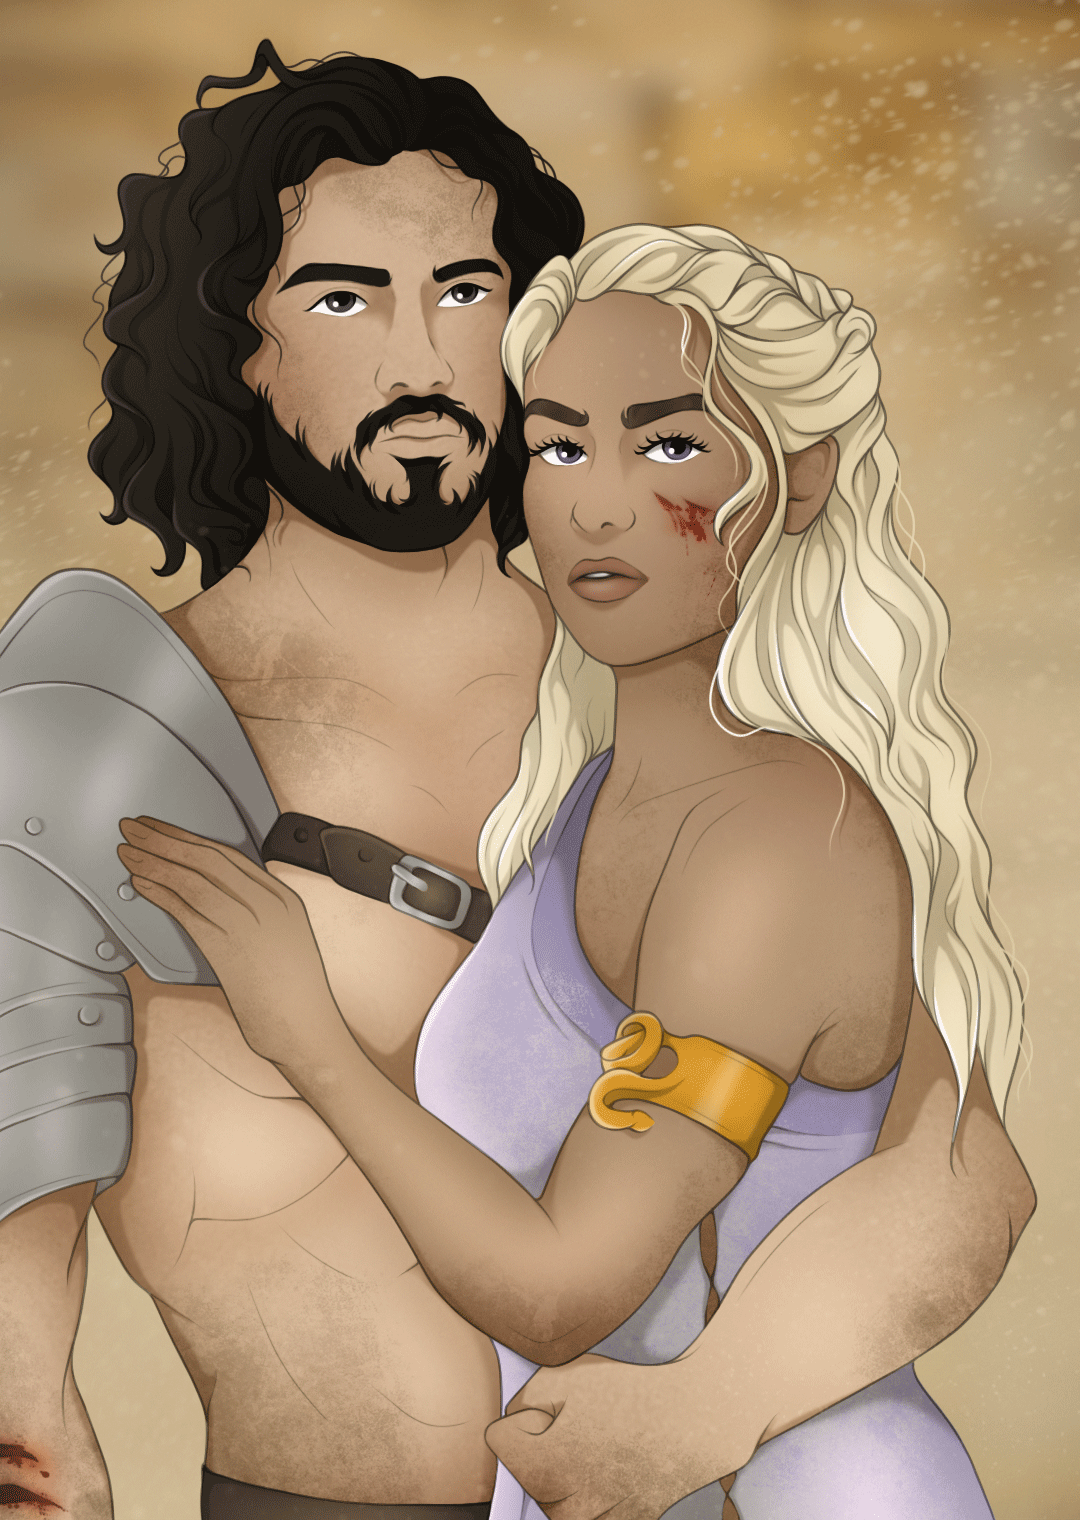 evax3: JON &amp;amp; DANY | RATING: T | GOT/ASOIAF | 3K A Dragon Is Not A Slave It was all just a bl